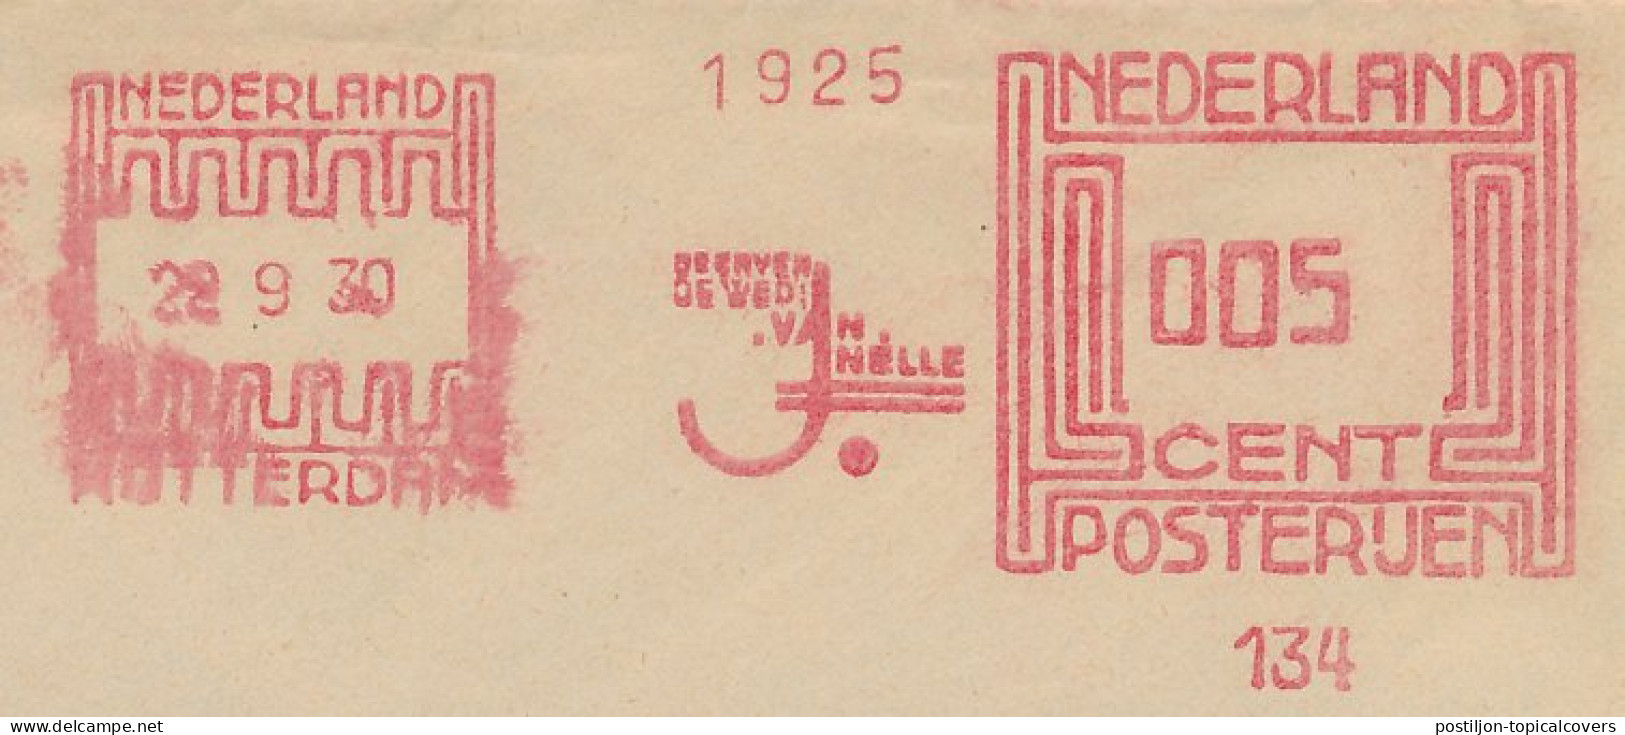 Meter Cover Netherlands 1930 Tobacco - Van Nelle Rotterdam - Tabac